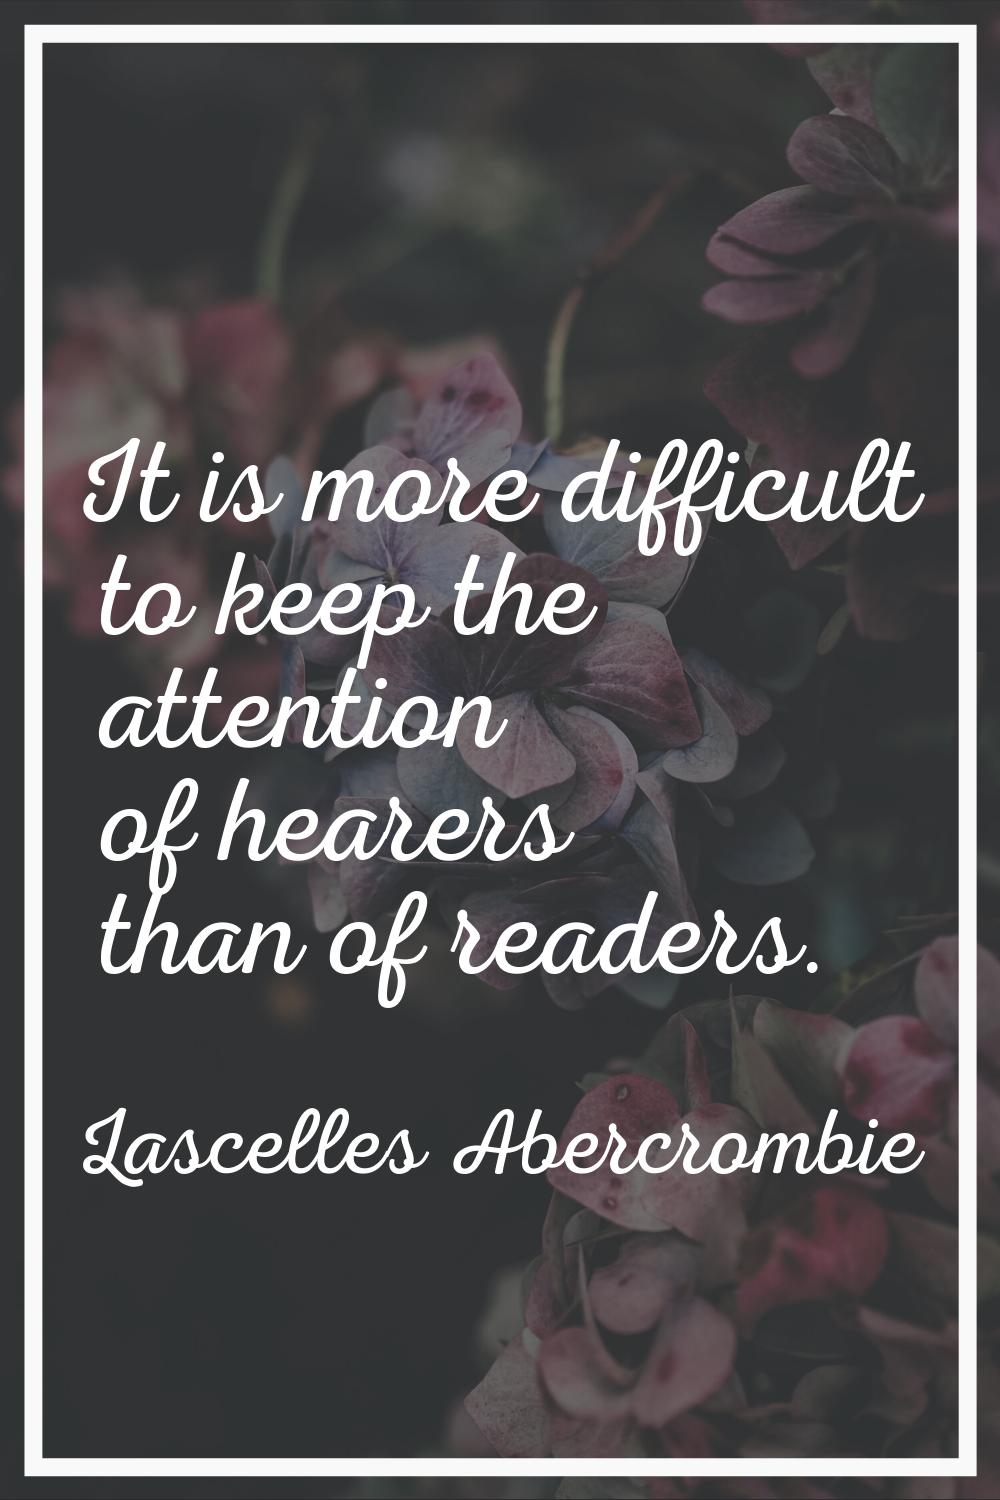 It is more difficult to keep the attention of hearers than of readers.